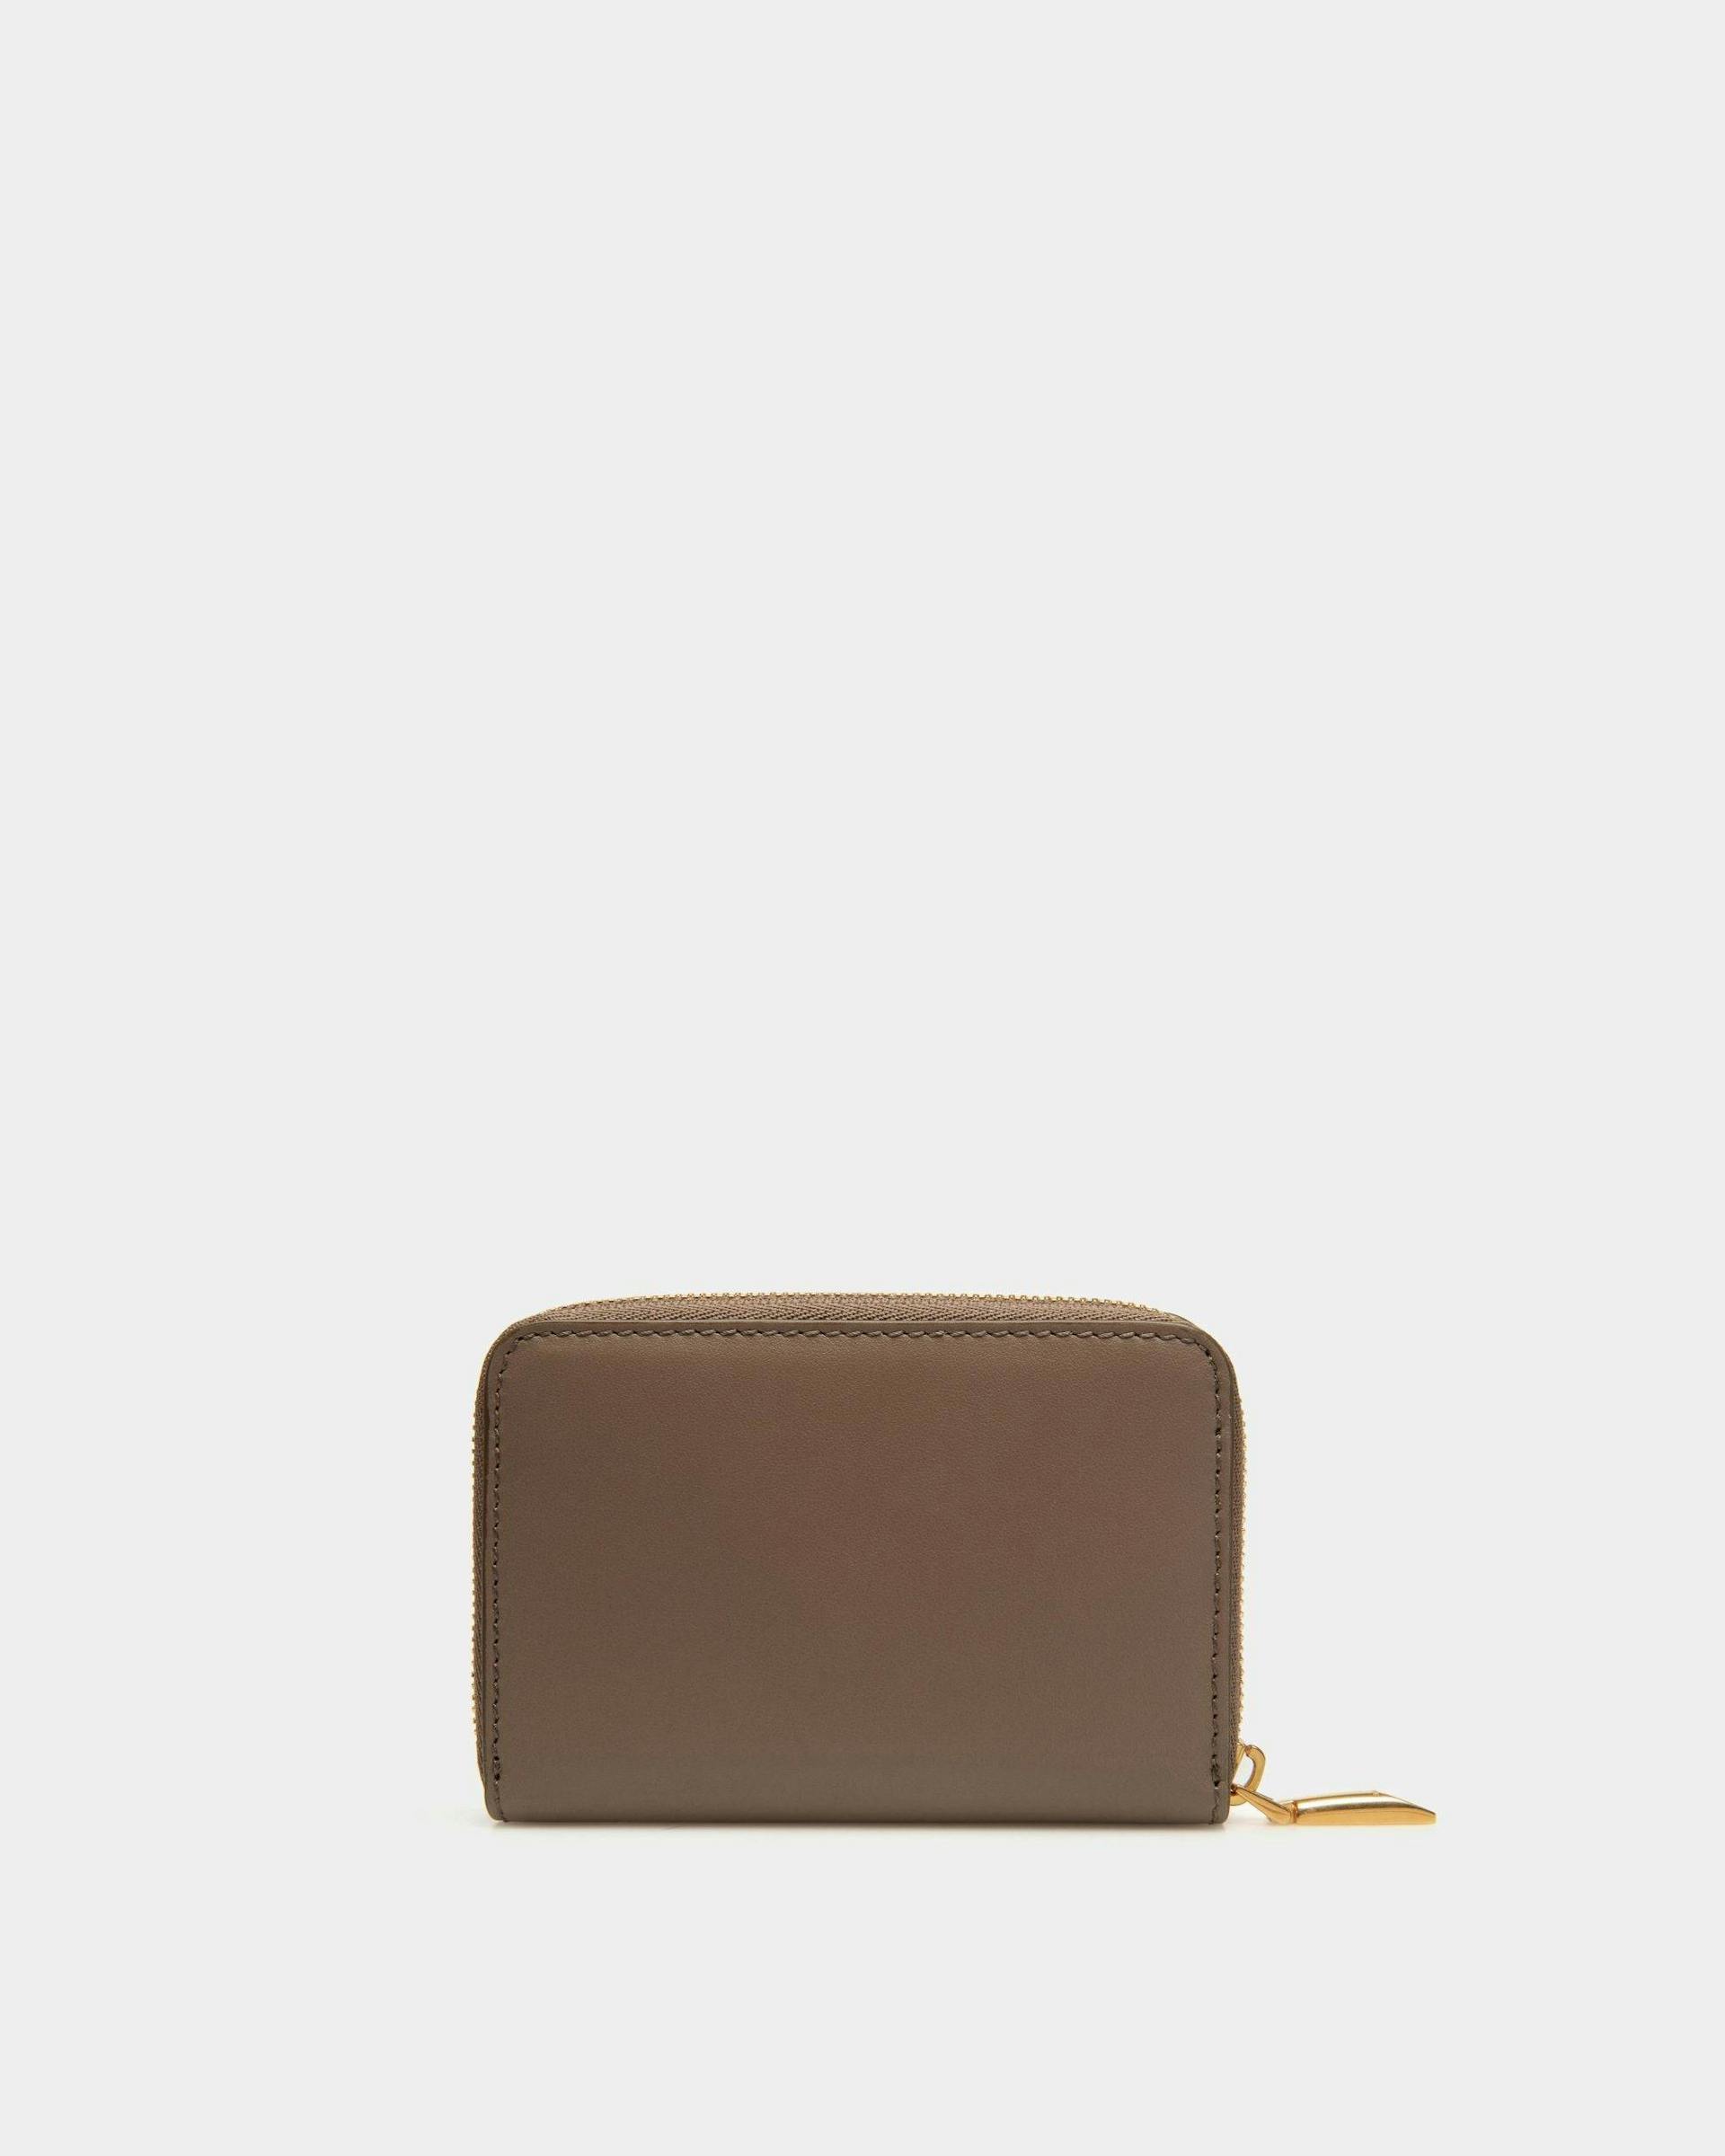 Women's Emblem Coin & Card Wallet in Beige Leather | Bally | Still Life Back